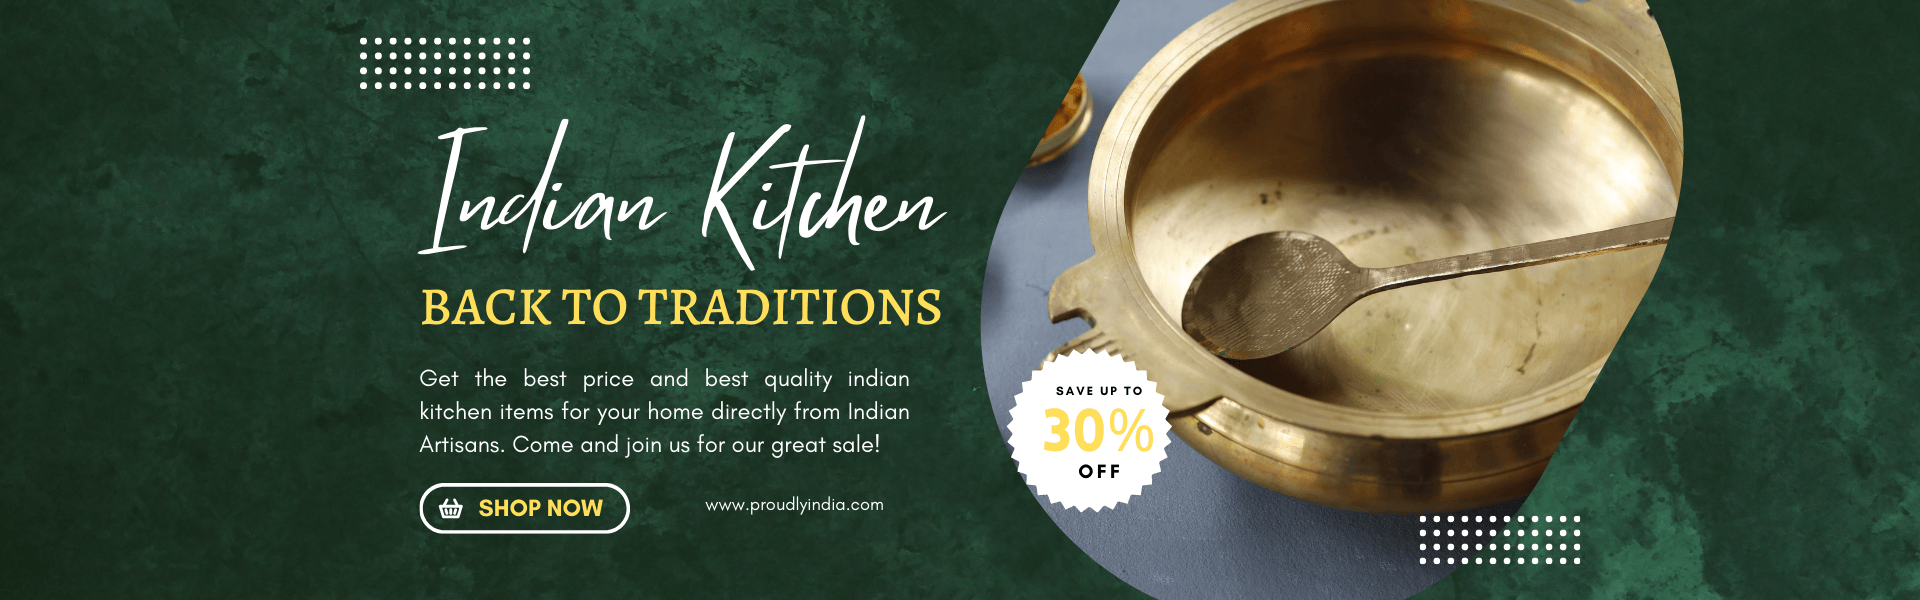 Traditional cookware